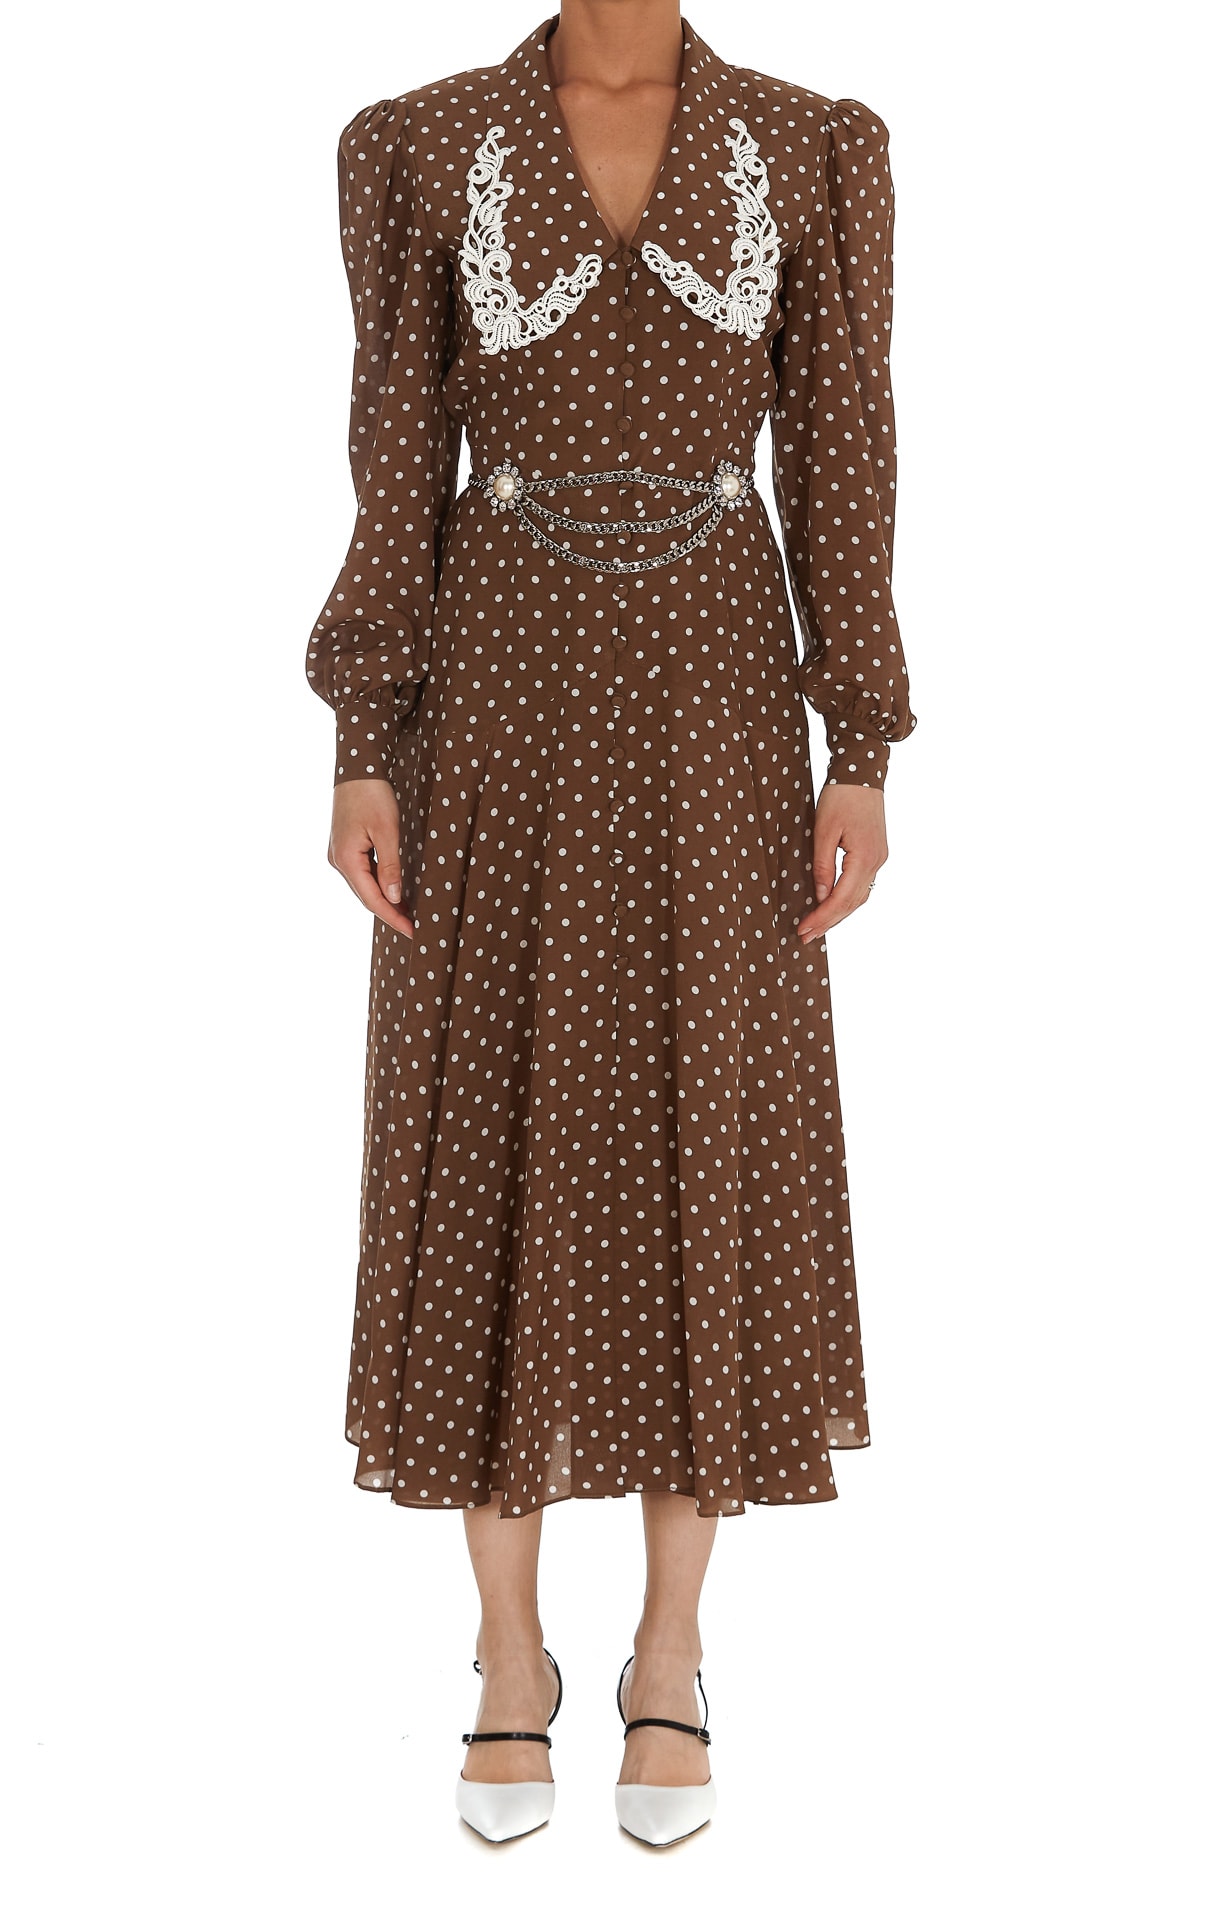 Alessandra Rich Polka Dot Dress With Embroidered Collar